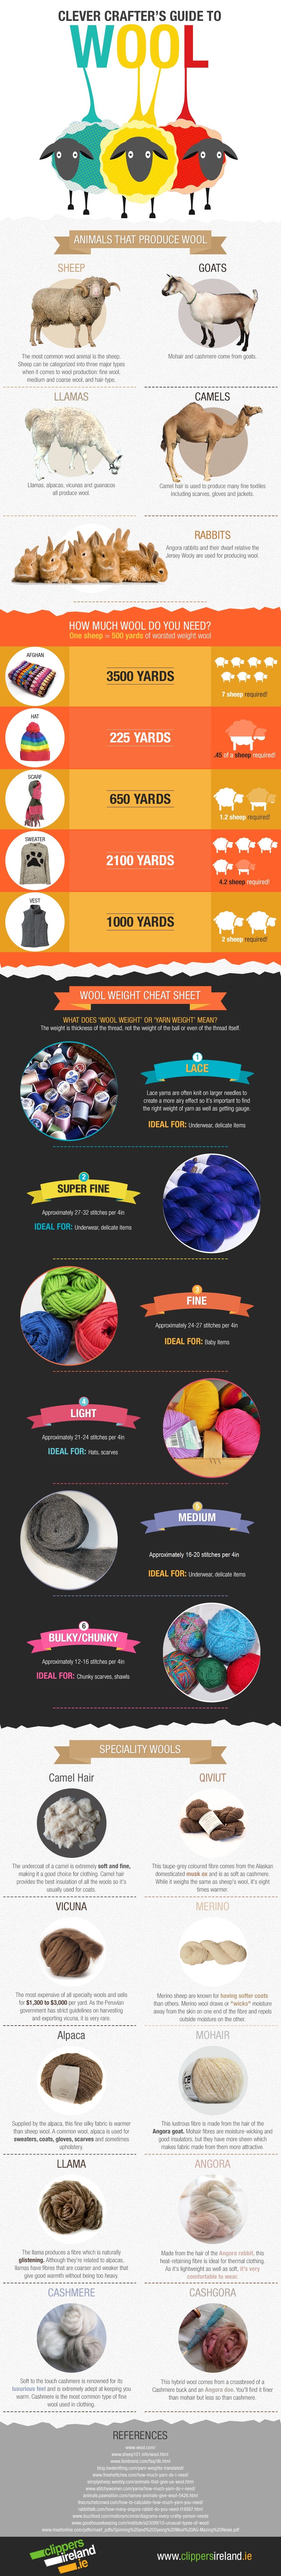 the various types of wool infographic